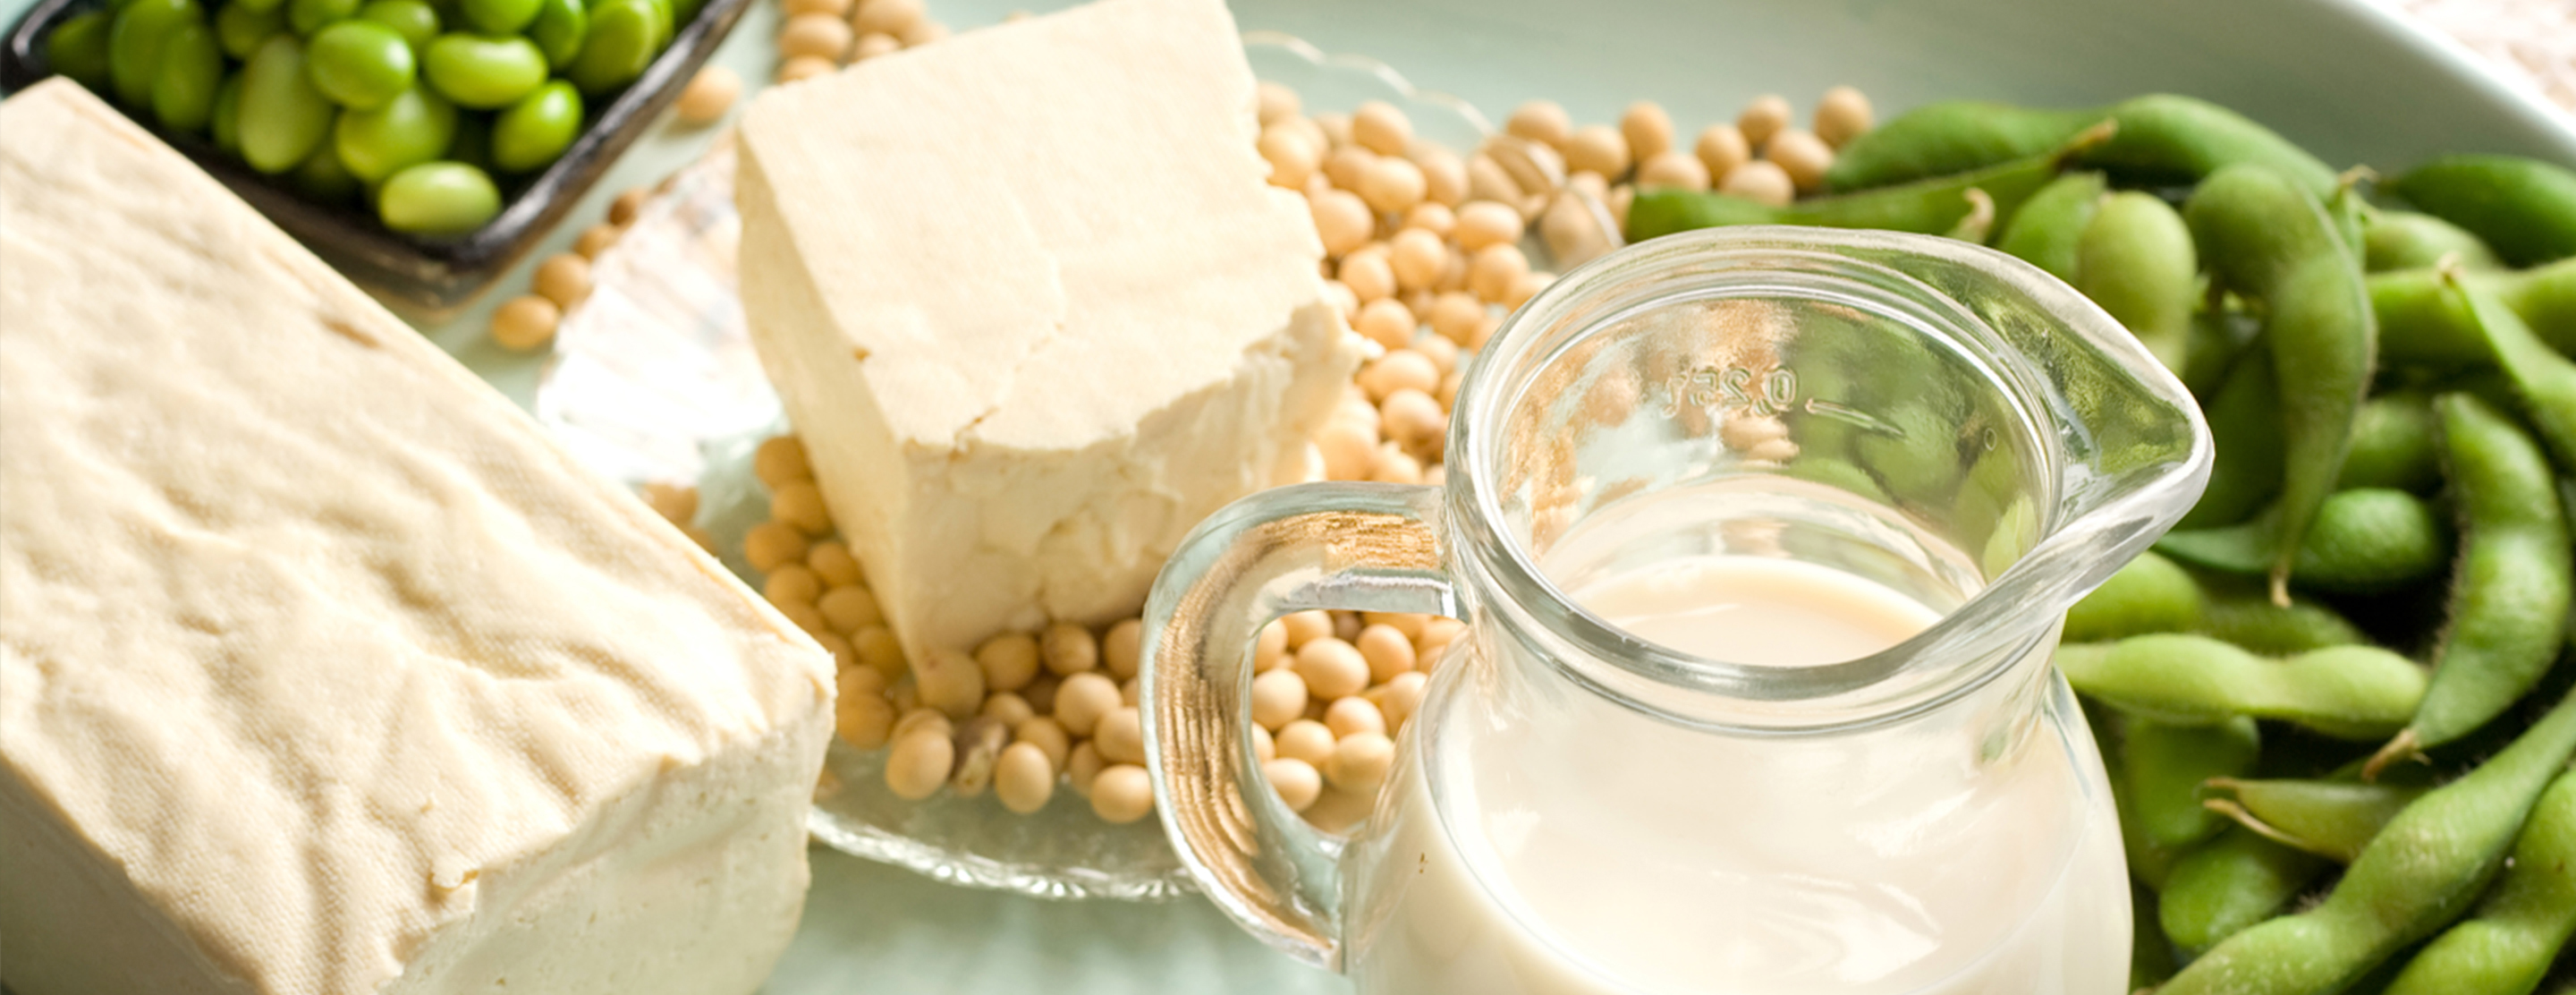 A Guide to Foods Rich in Soy, Patient Education